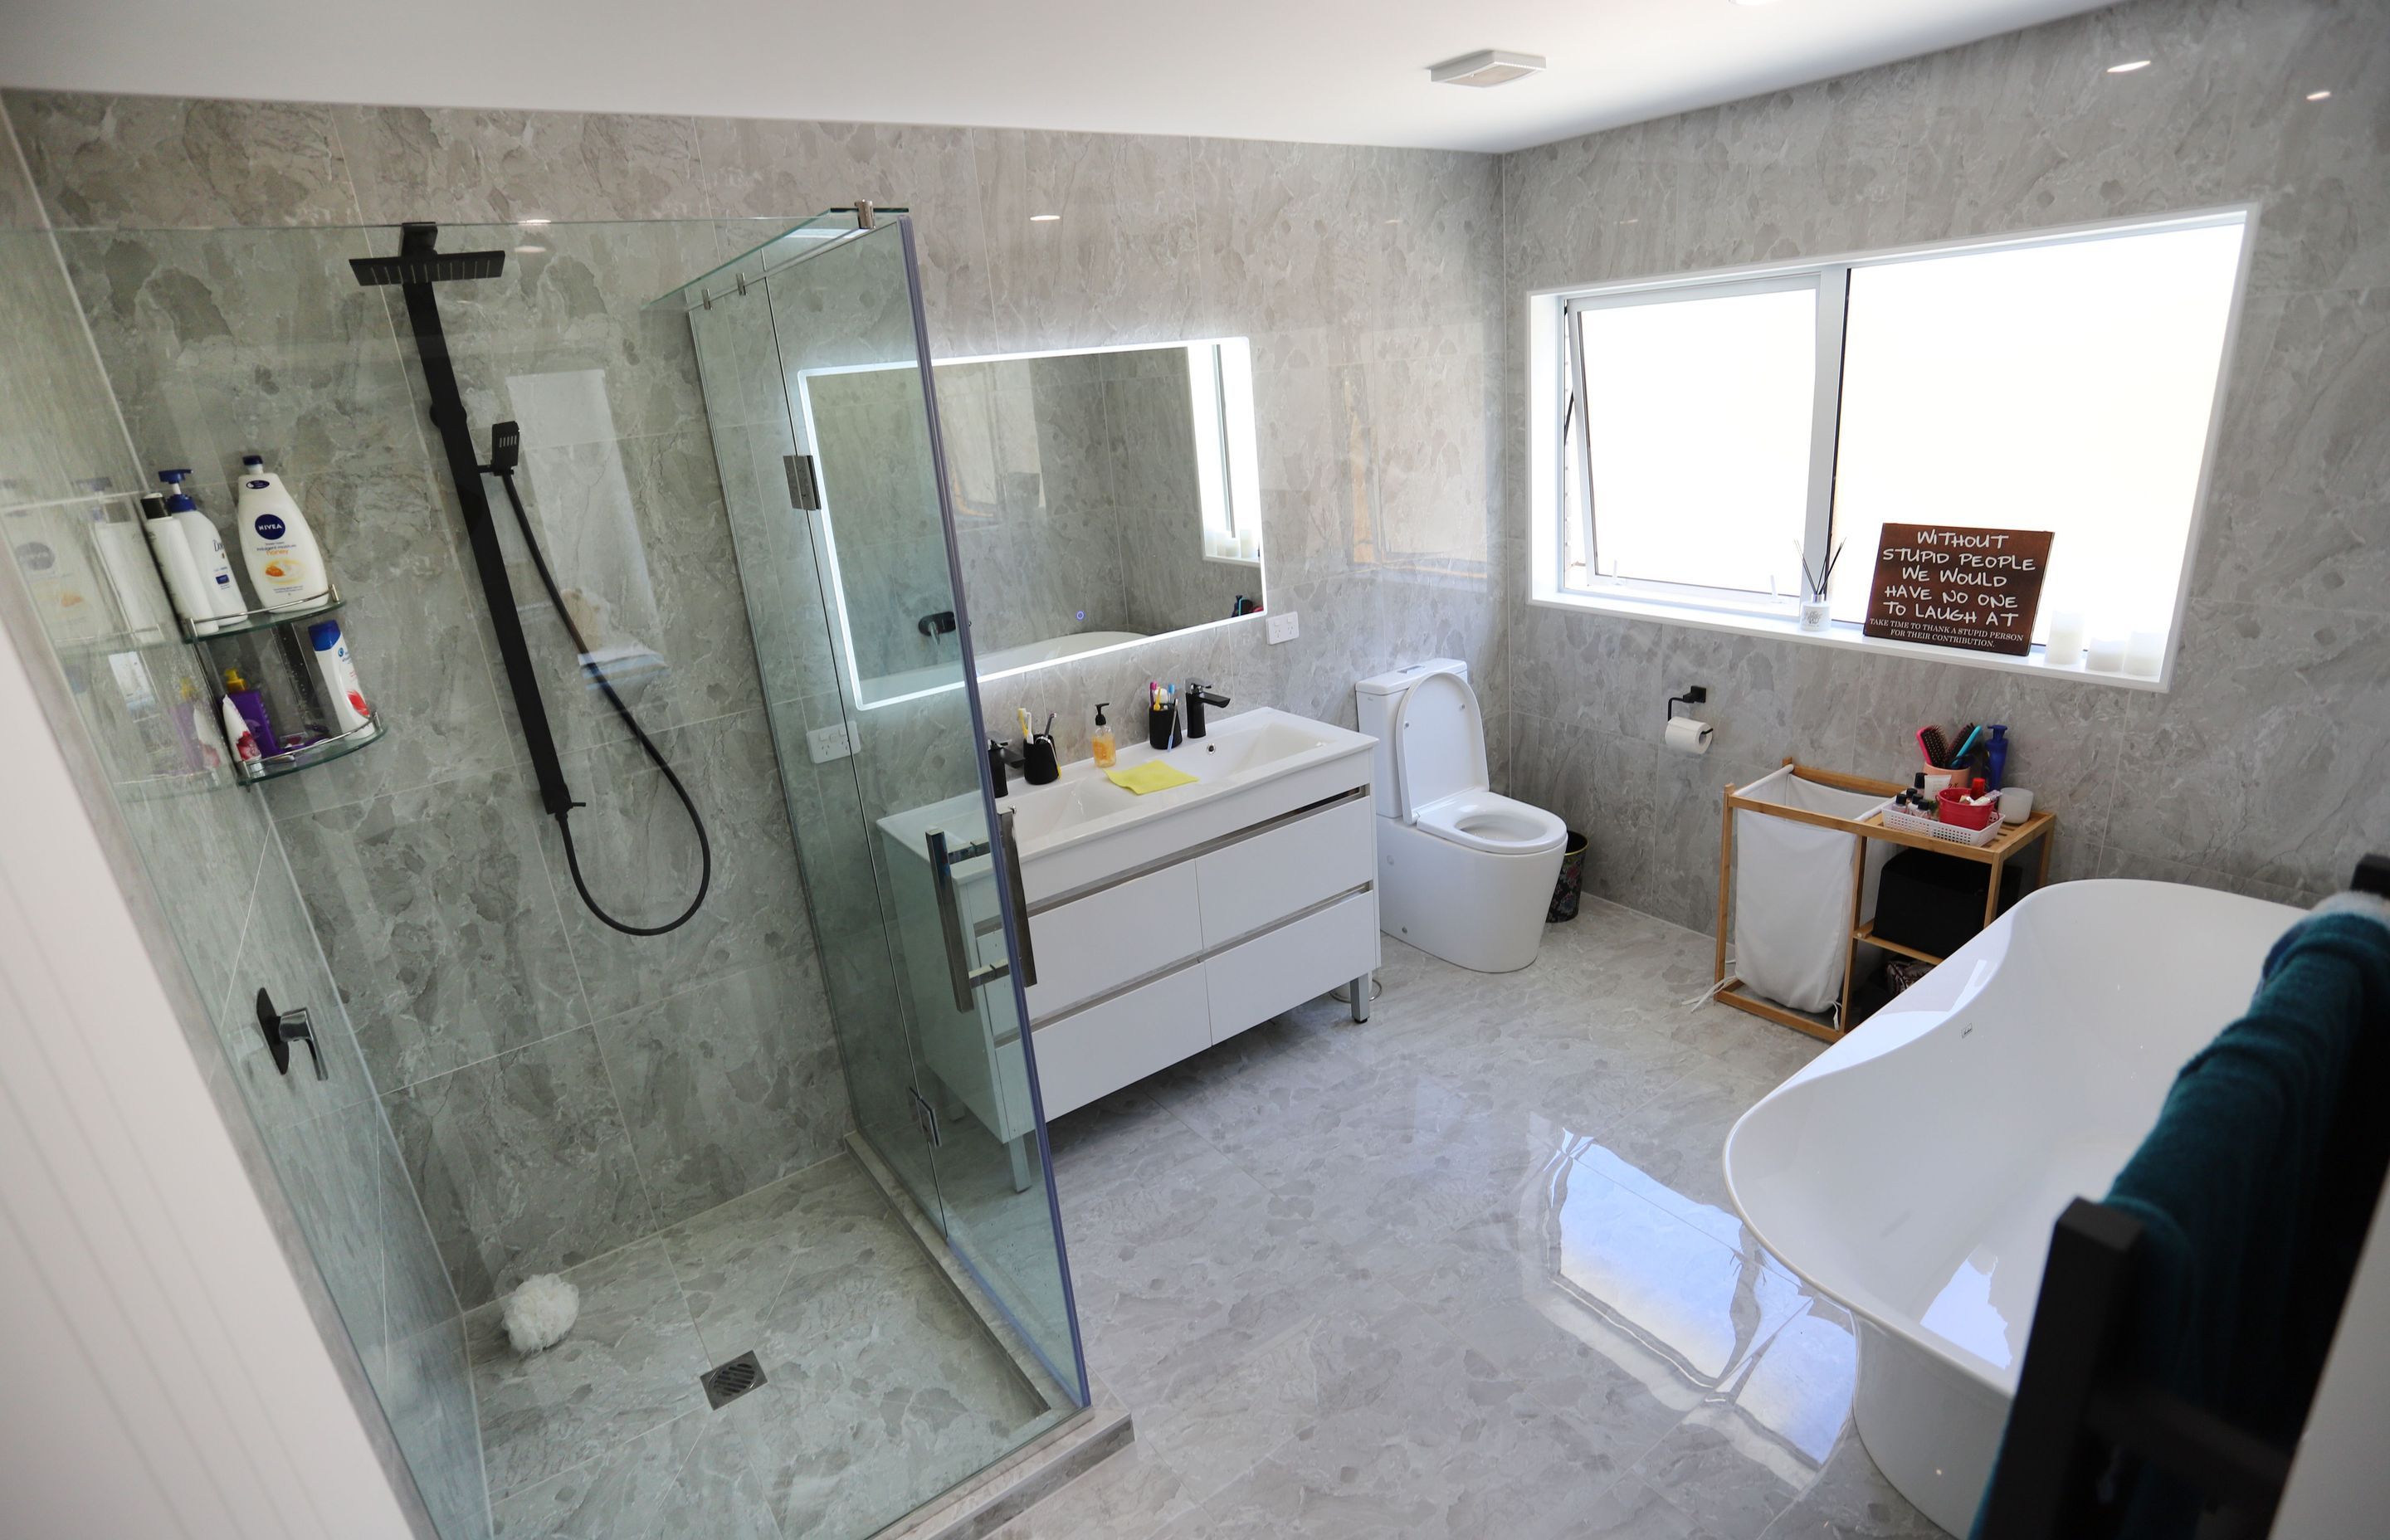 BATHROOM RENOVATION PHOTOS FOR OUR TOP 10 RENOVATIONS IN AUCKLAND